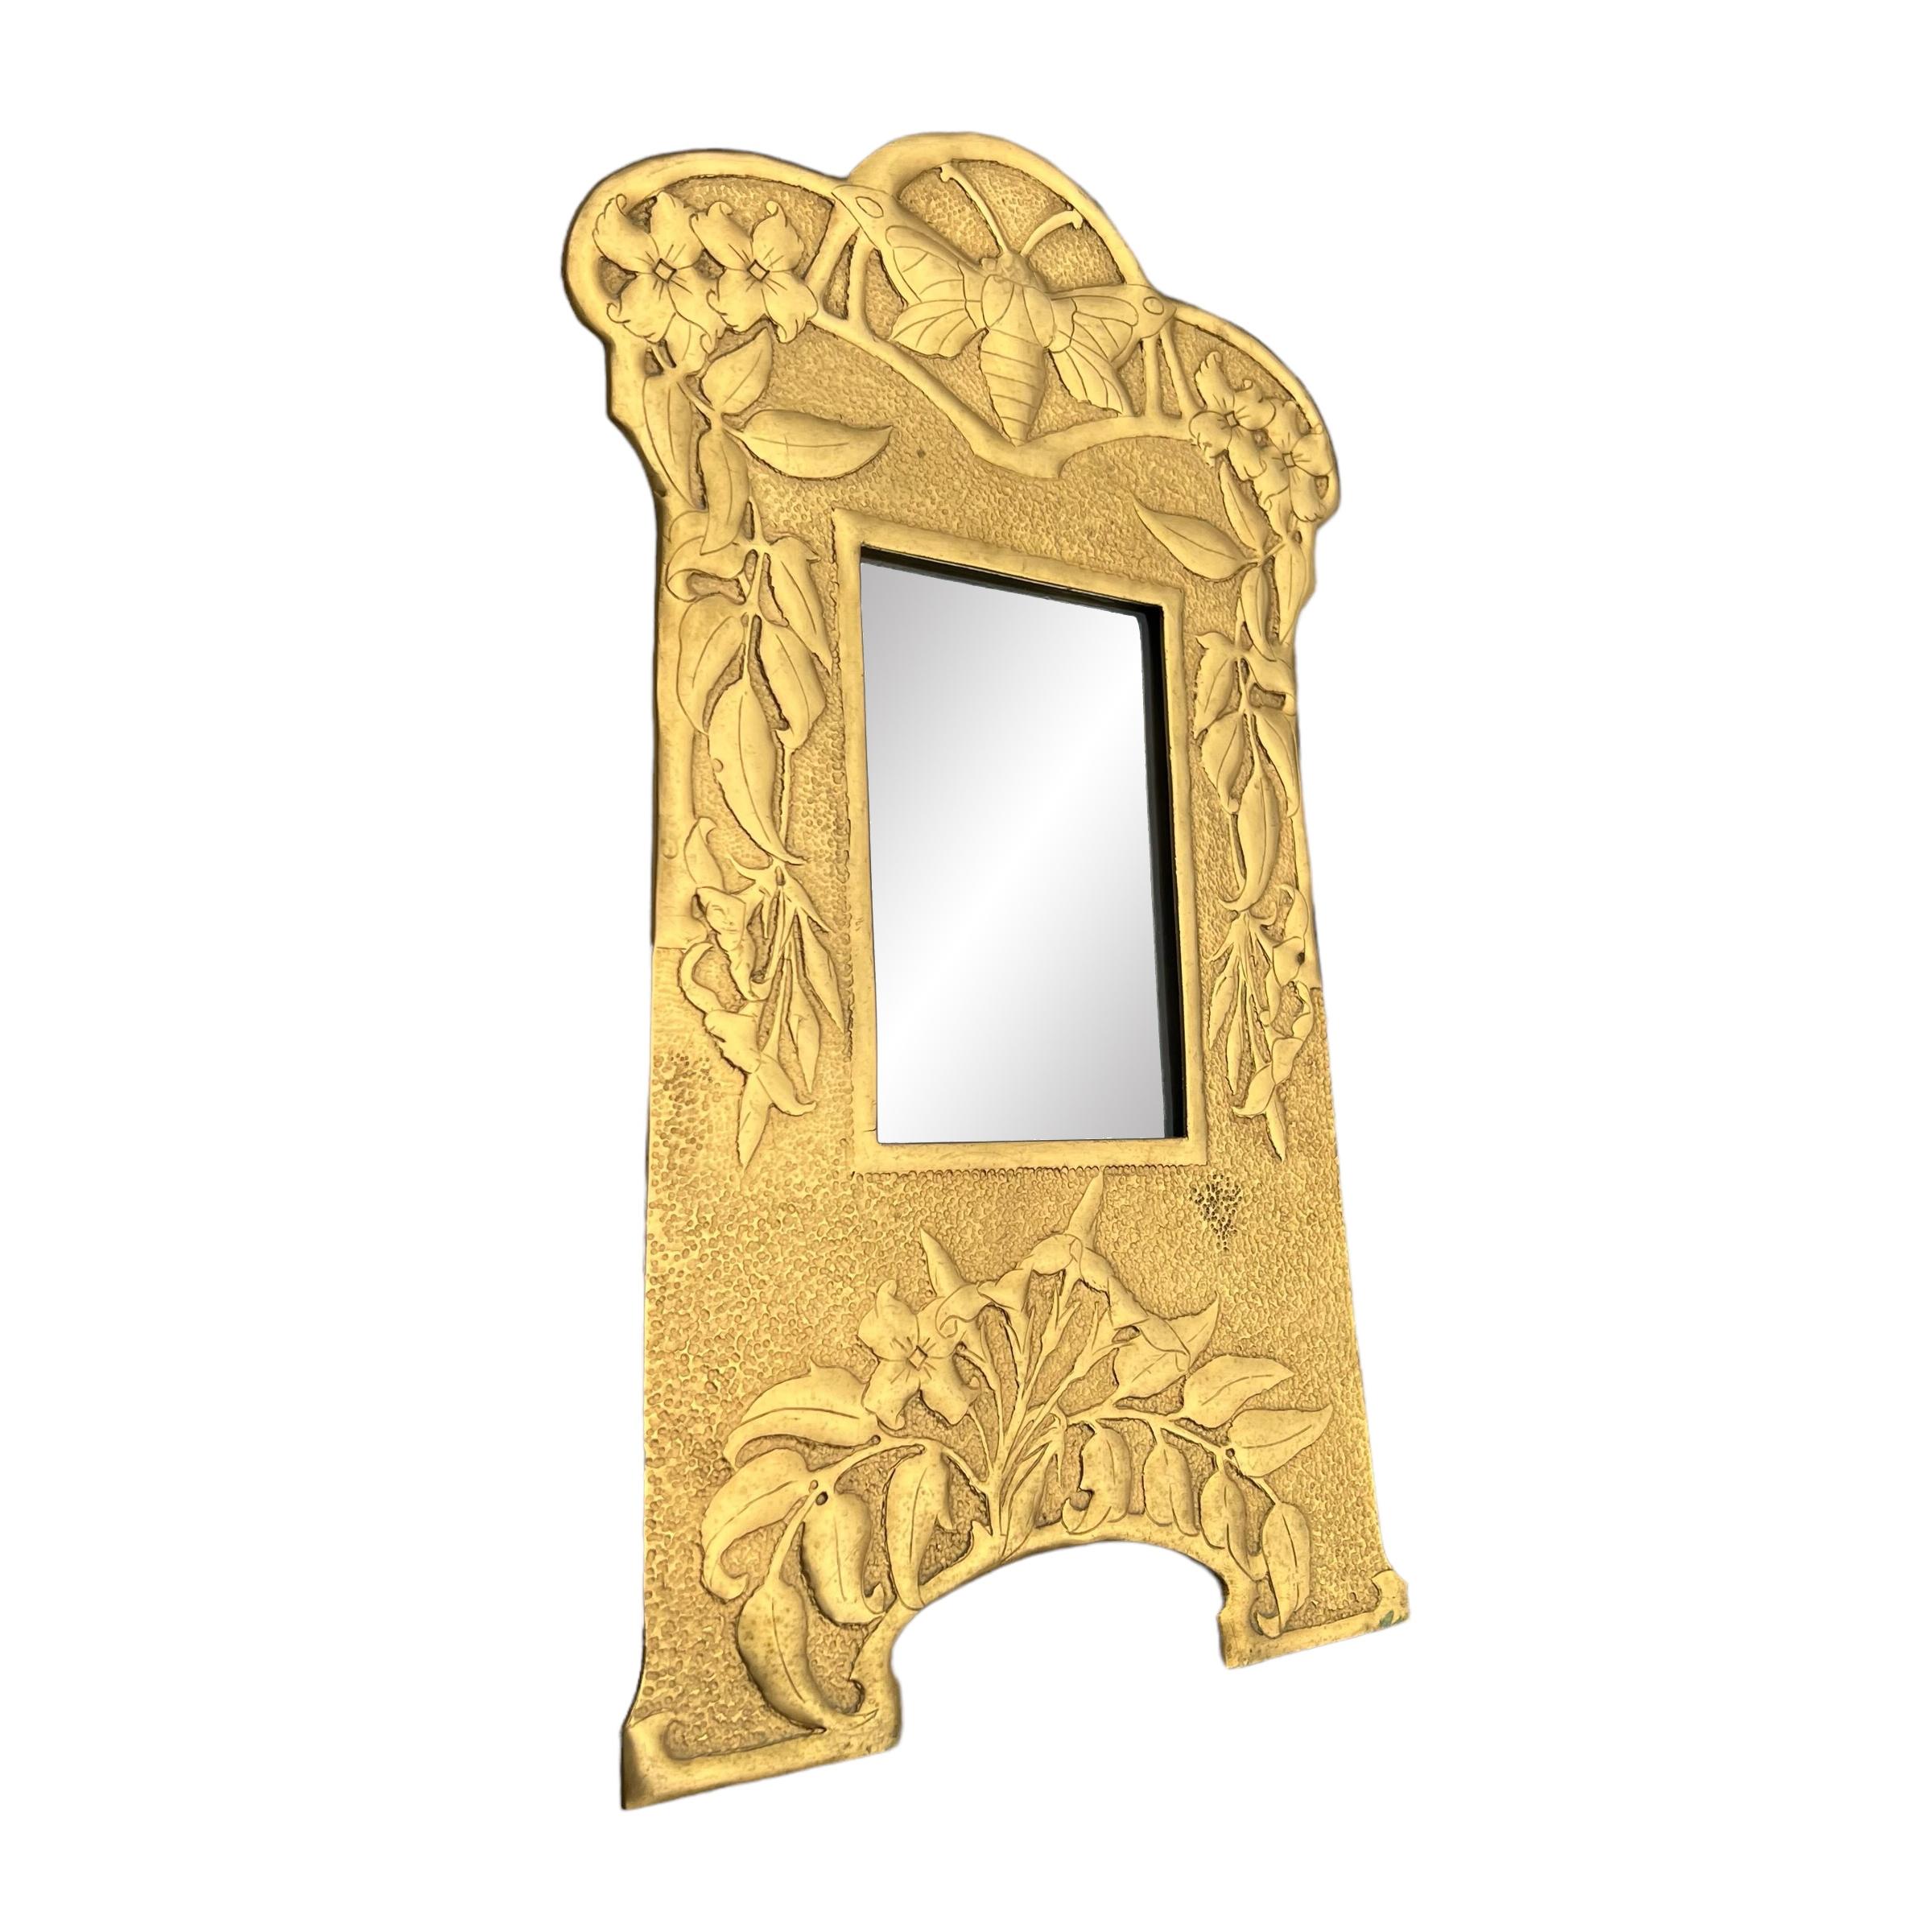 Repoussé Early 20th Century English Art Nouveau Brass Framed Mirror For Sale